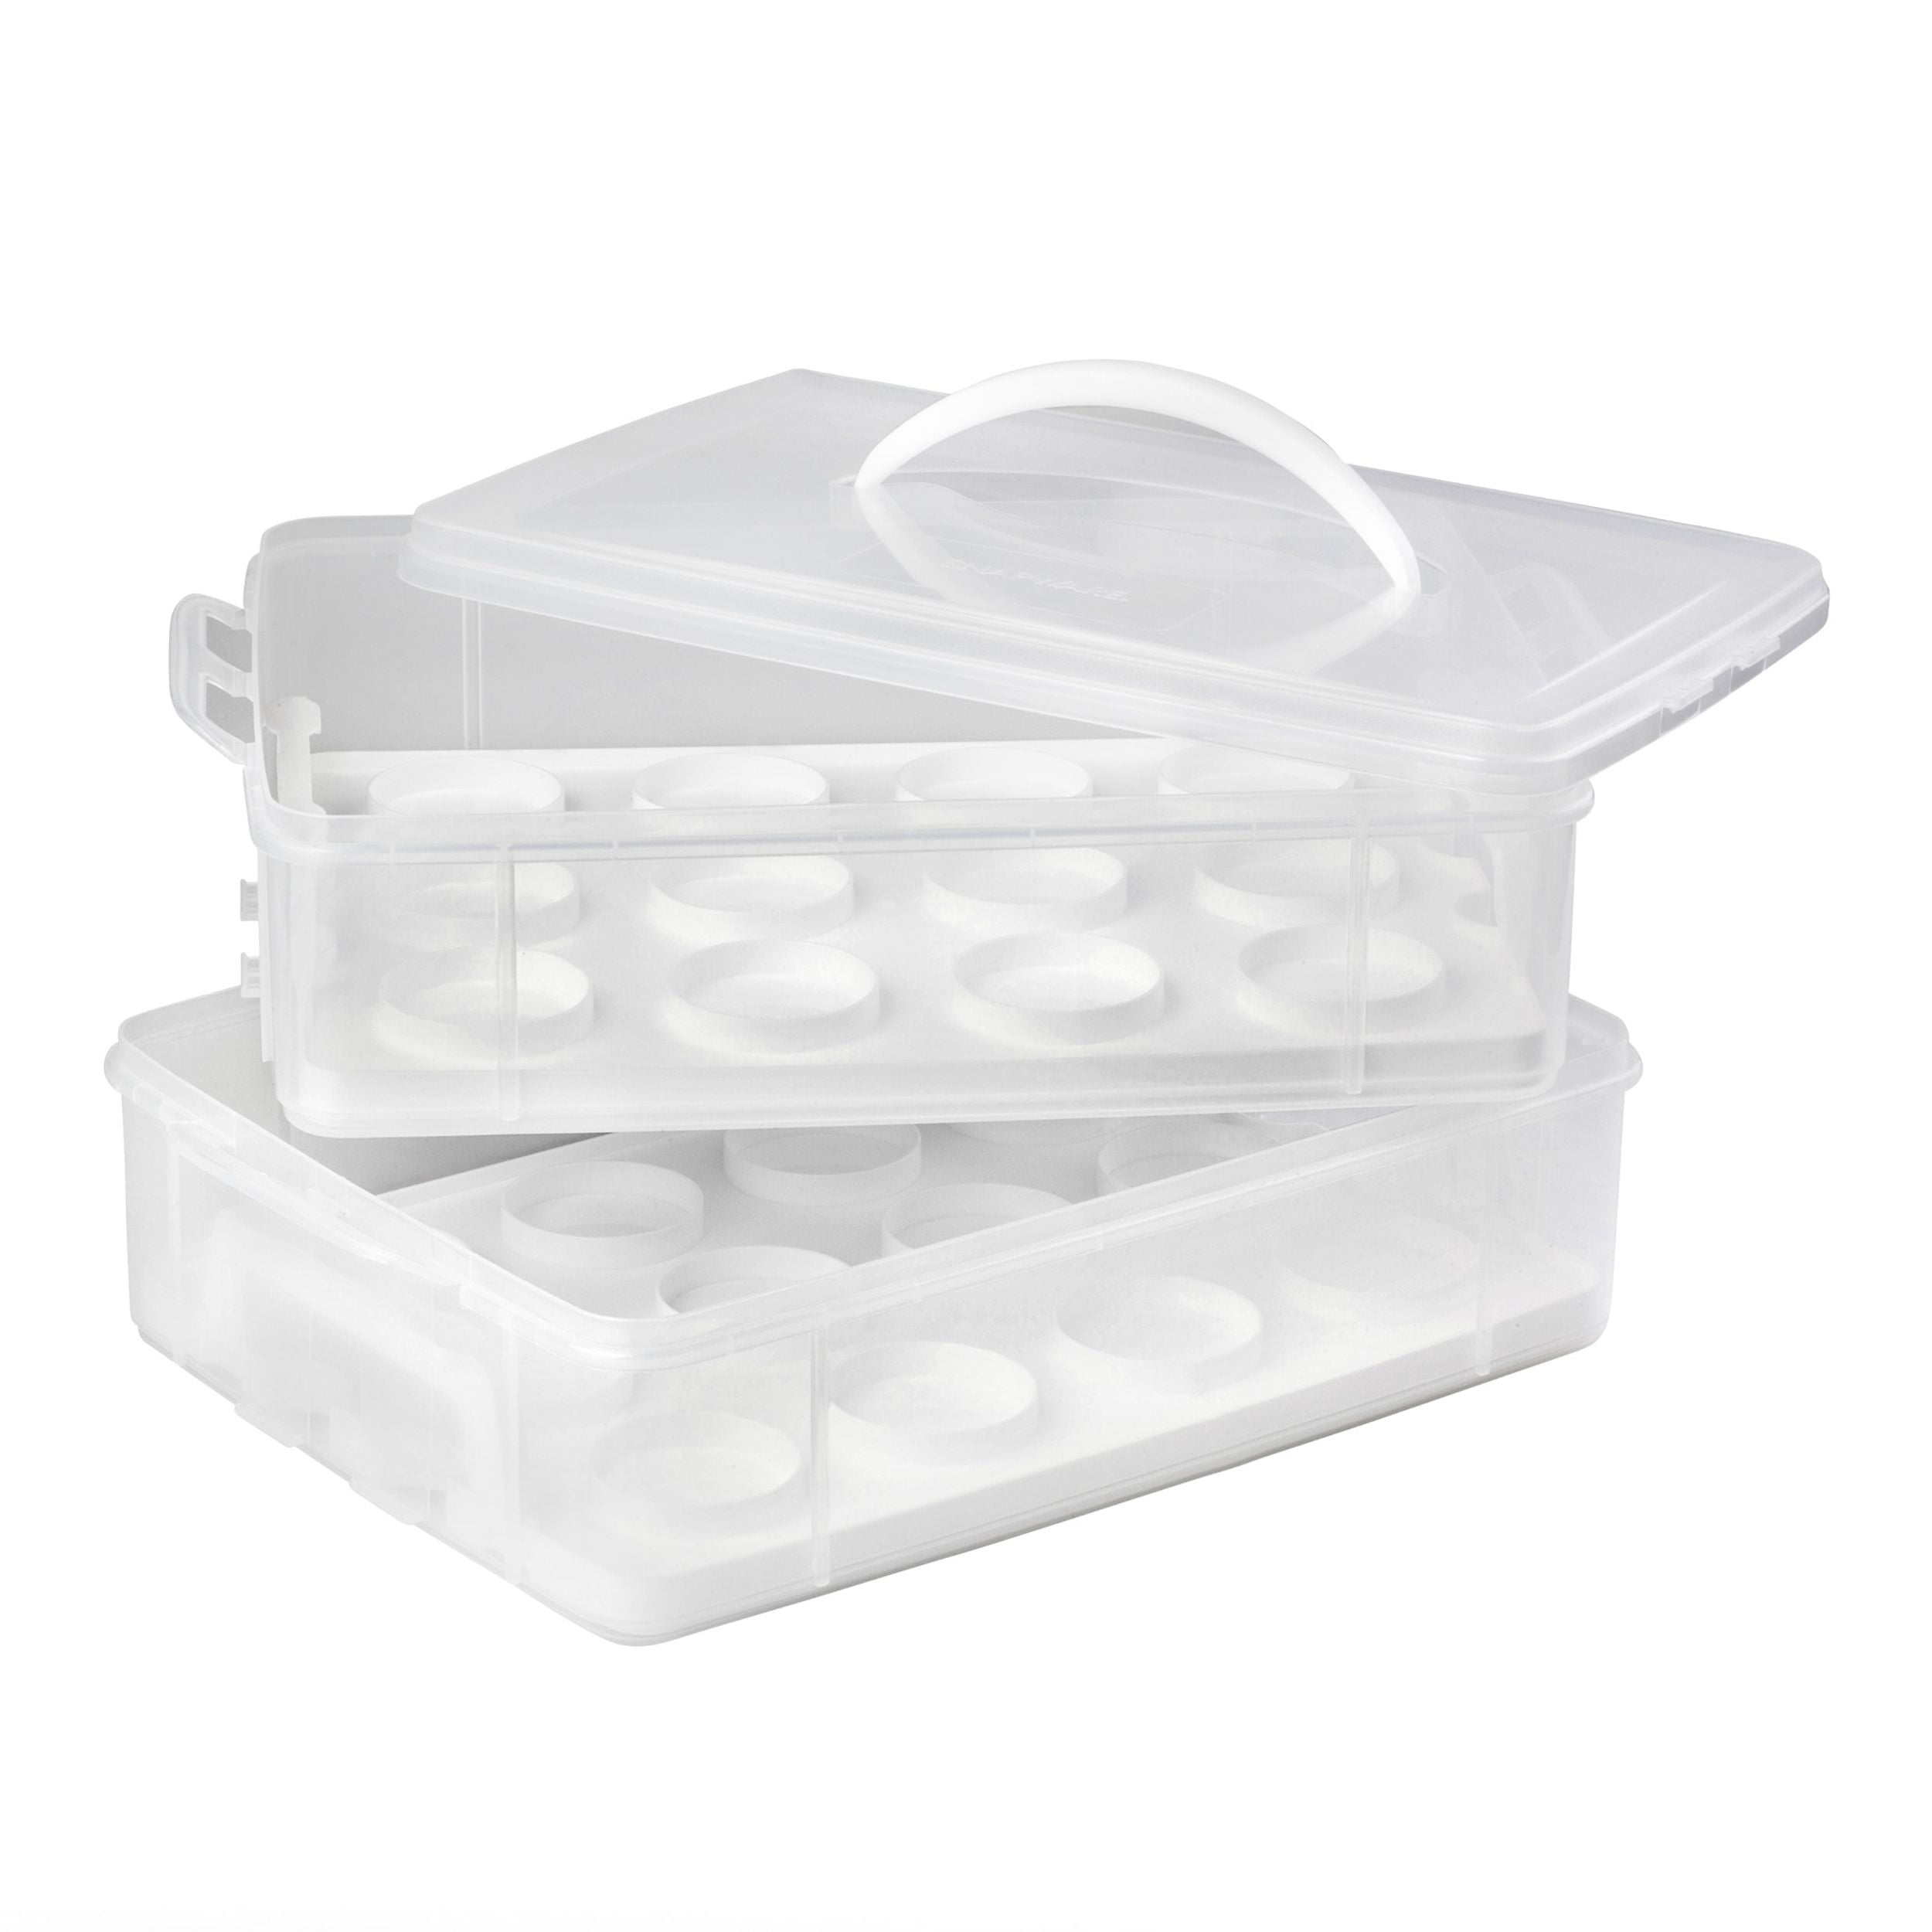 Cake Carrier Storage Container with Lid and Handle, Round Cupcake Keeper Cheesecake Holder for Transport Cakes, Pies, Desserts, Size: Fits 9” Diameter